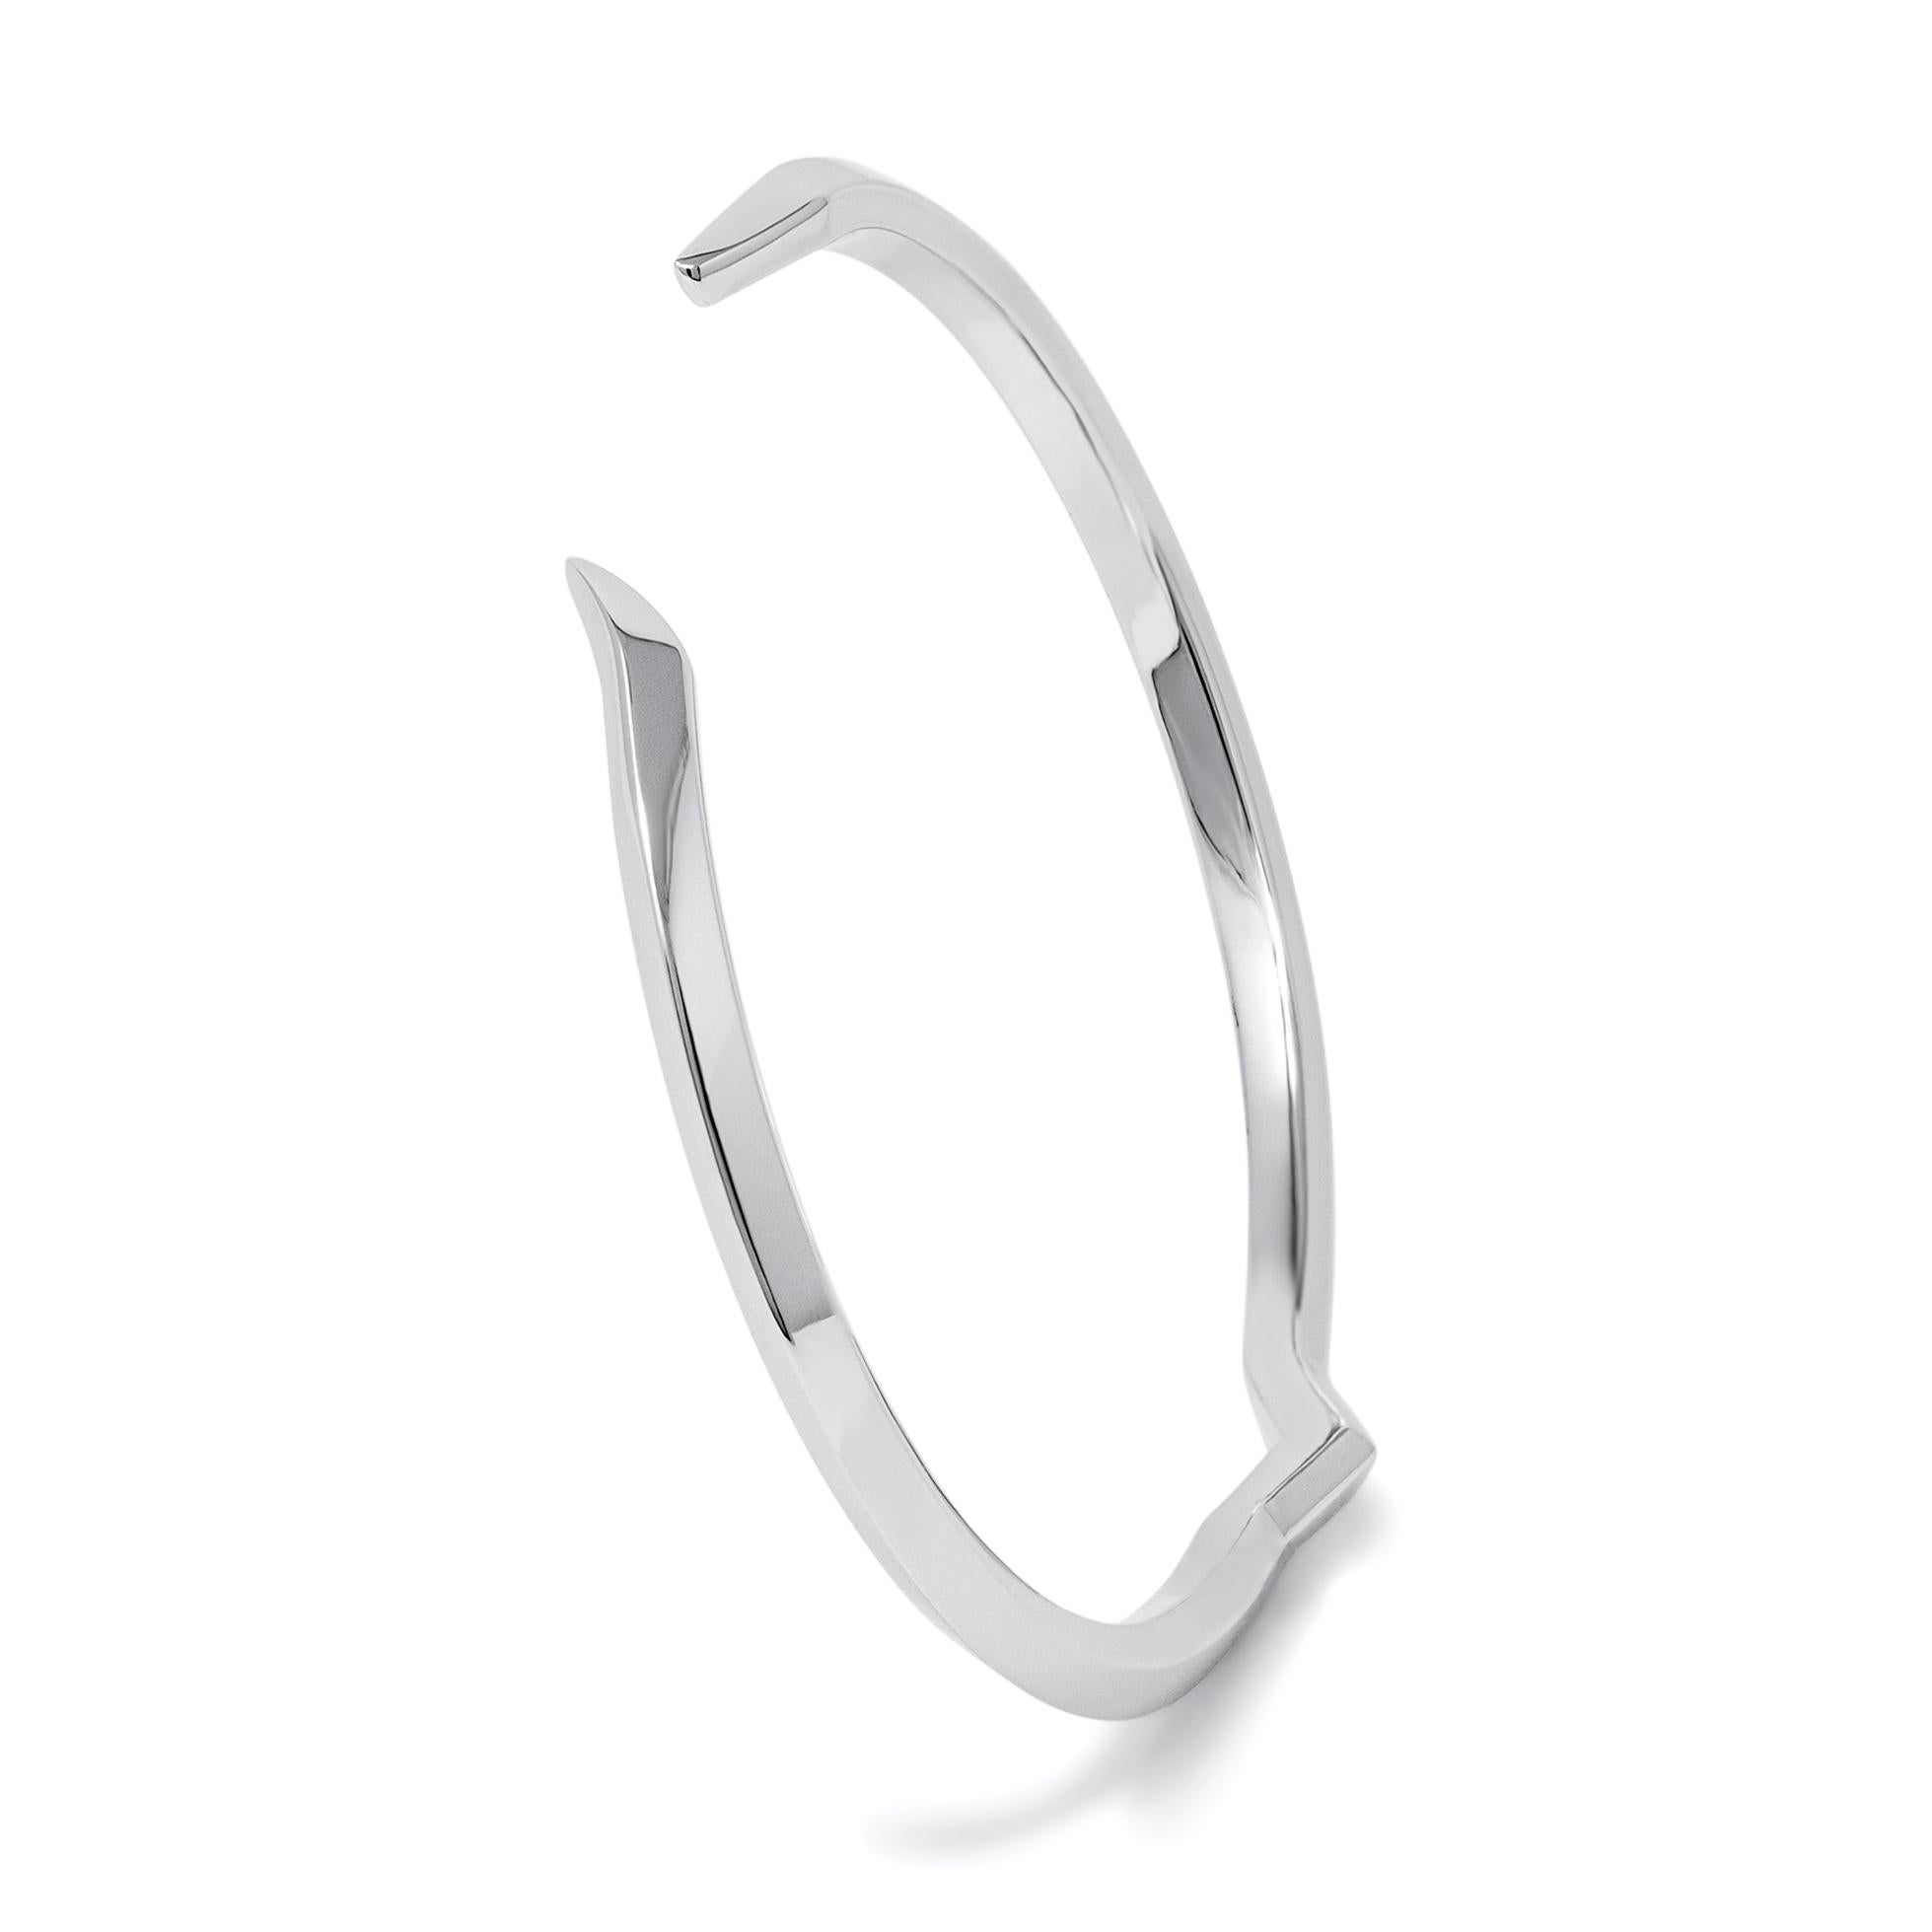 The Fang Bangle took inspiration from architecture, nature and calligraphy to create a minimalist yet metaphorical design. The shape and structure of the design took references from the antarctic animals'' skeletons and a stroke from the Chinese